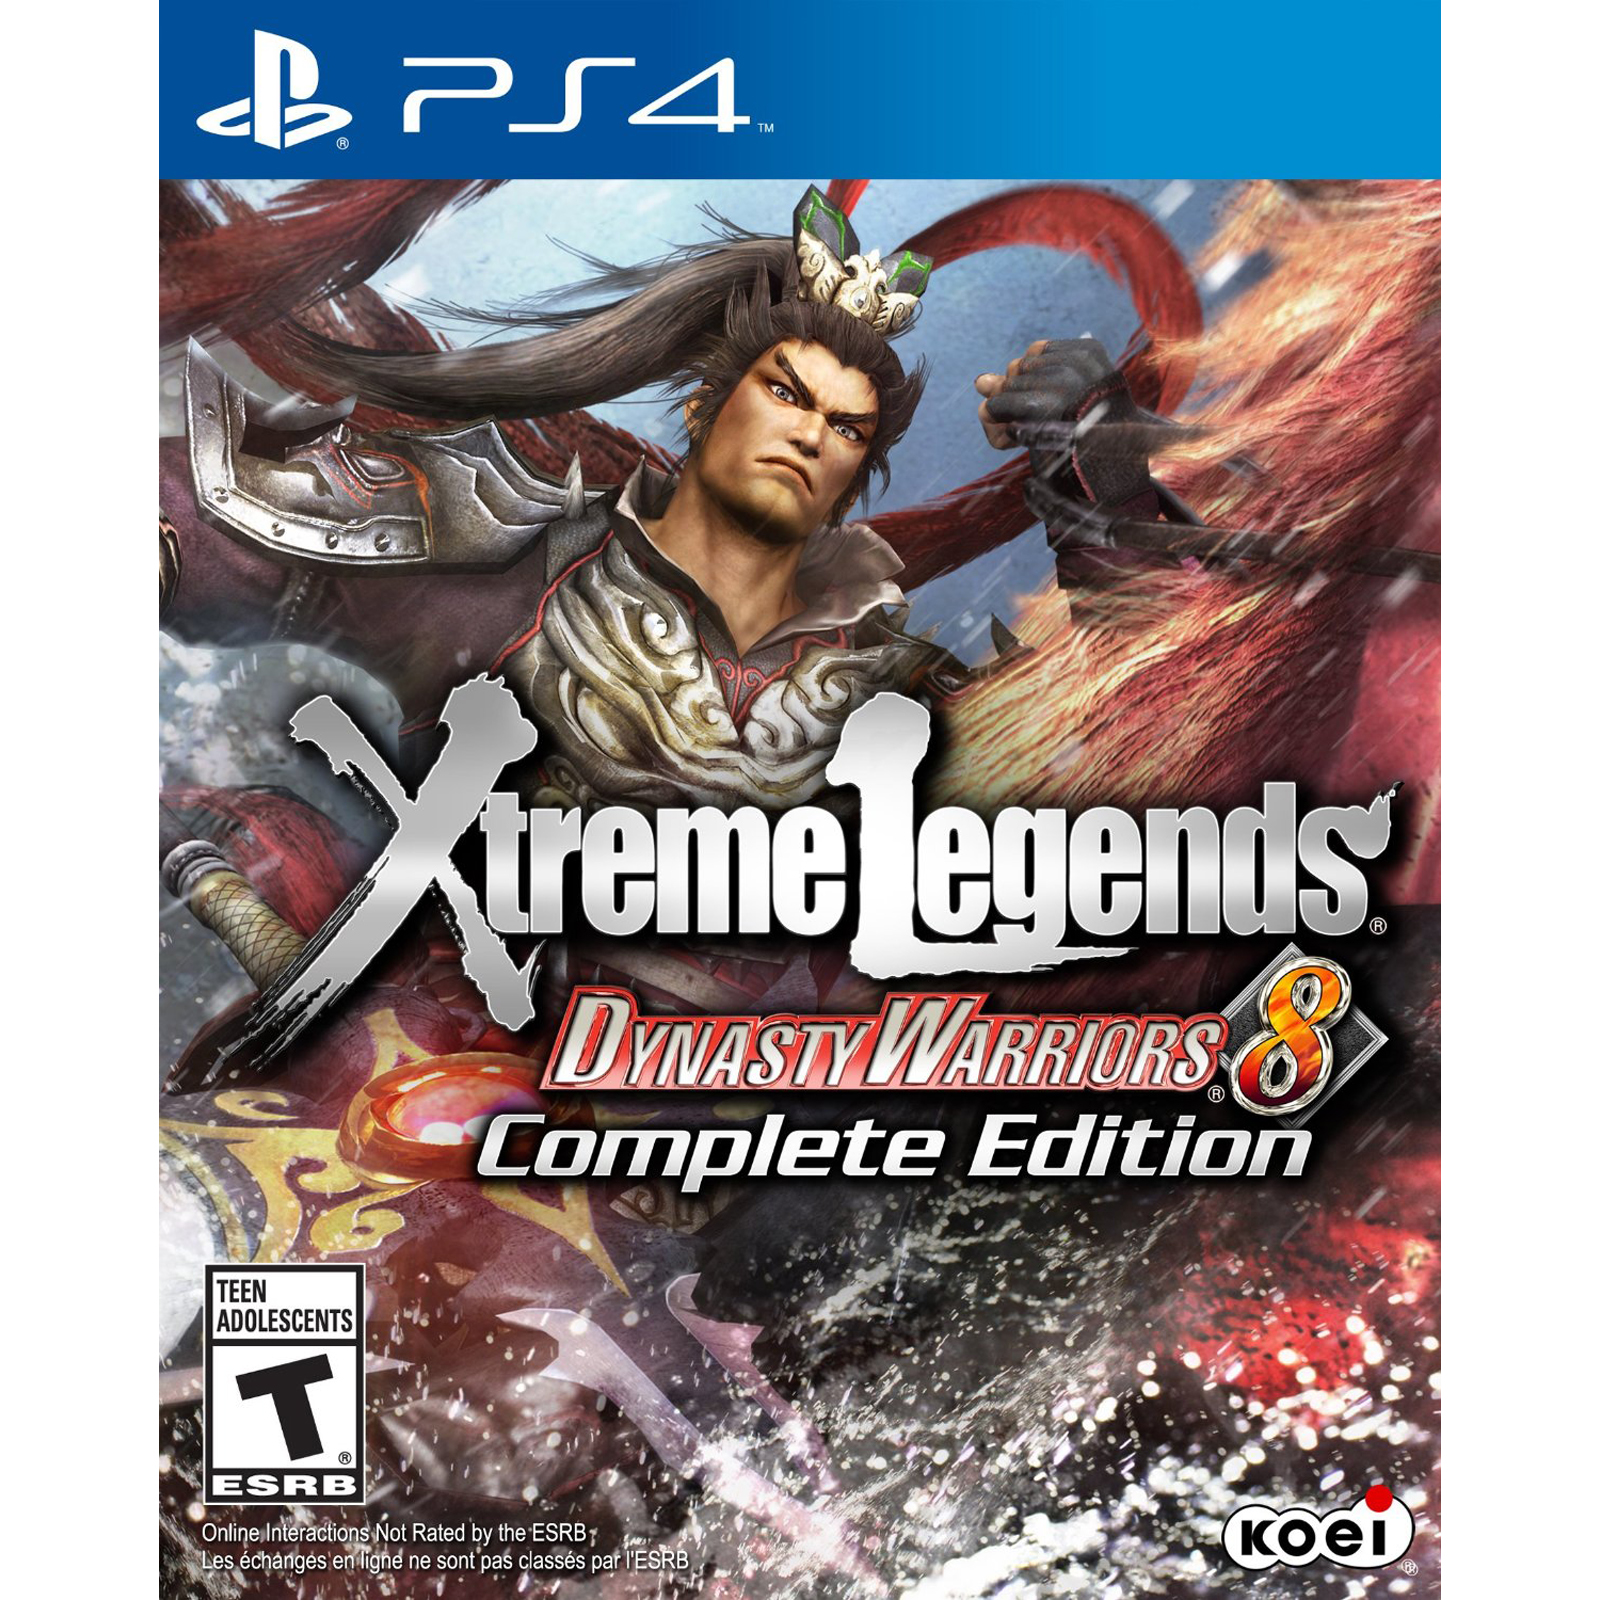 Tecmo Koei Dynasty Warriors 8 - Extreme Legends Complete Edition for PlayStation 4 (PS4)